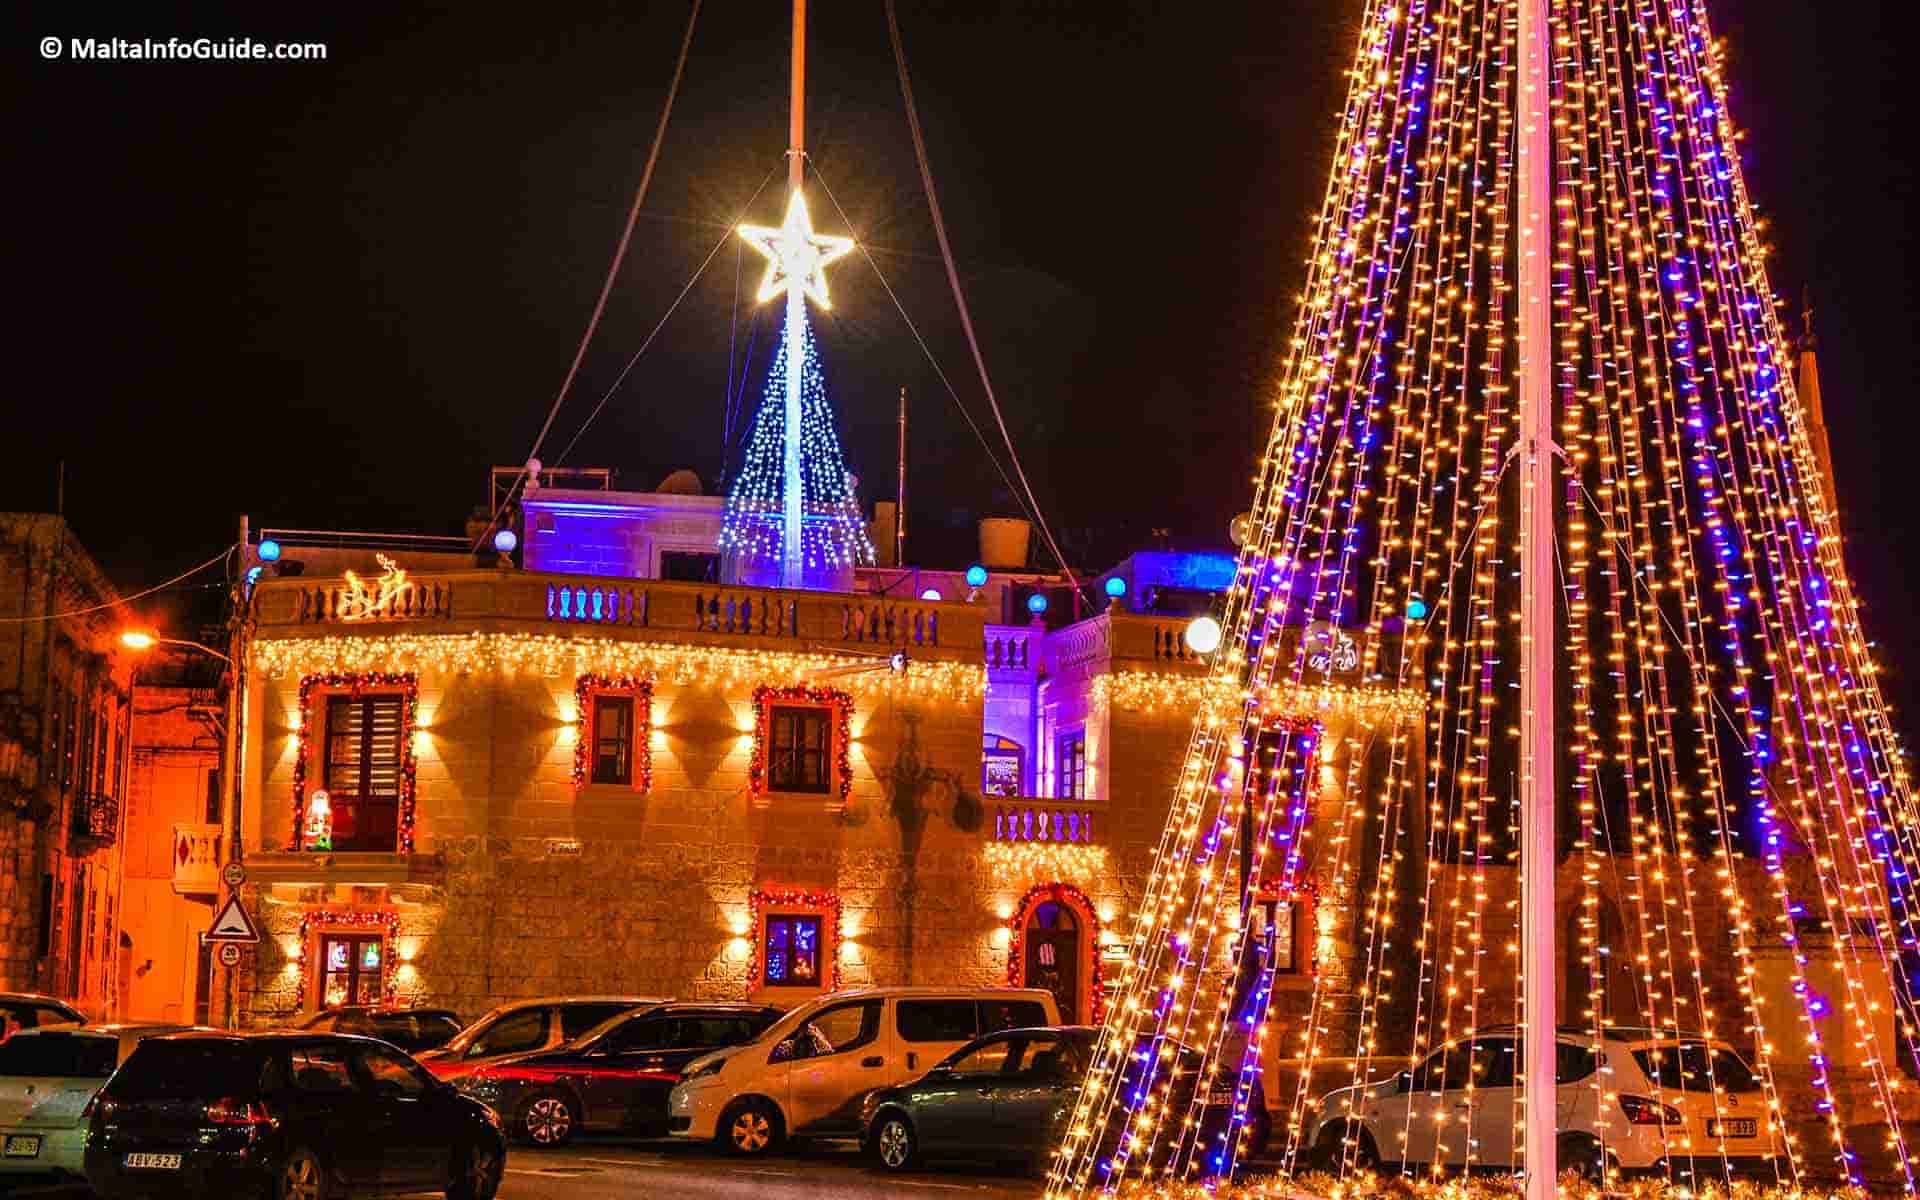 What Is Christmas In Malta Like And How Should You Spend It?